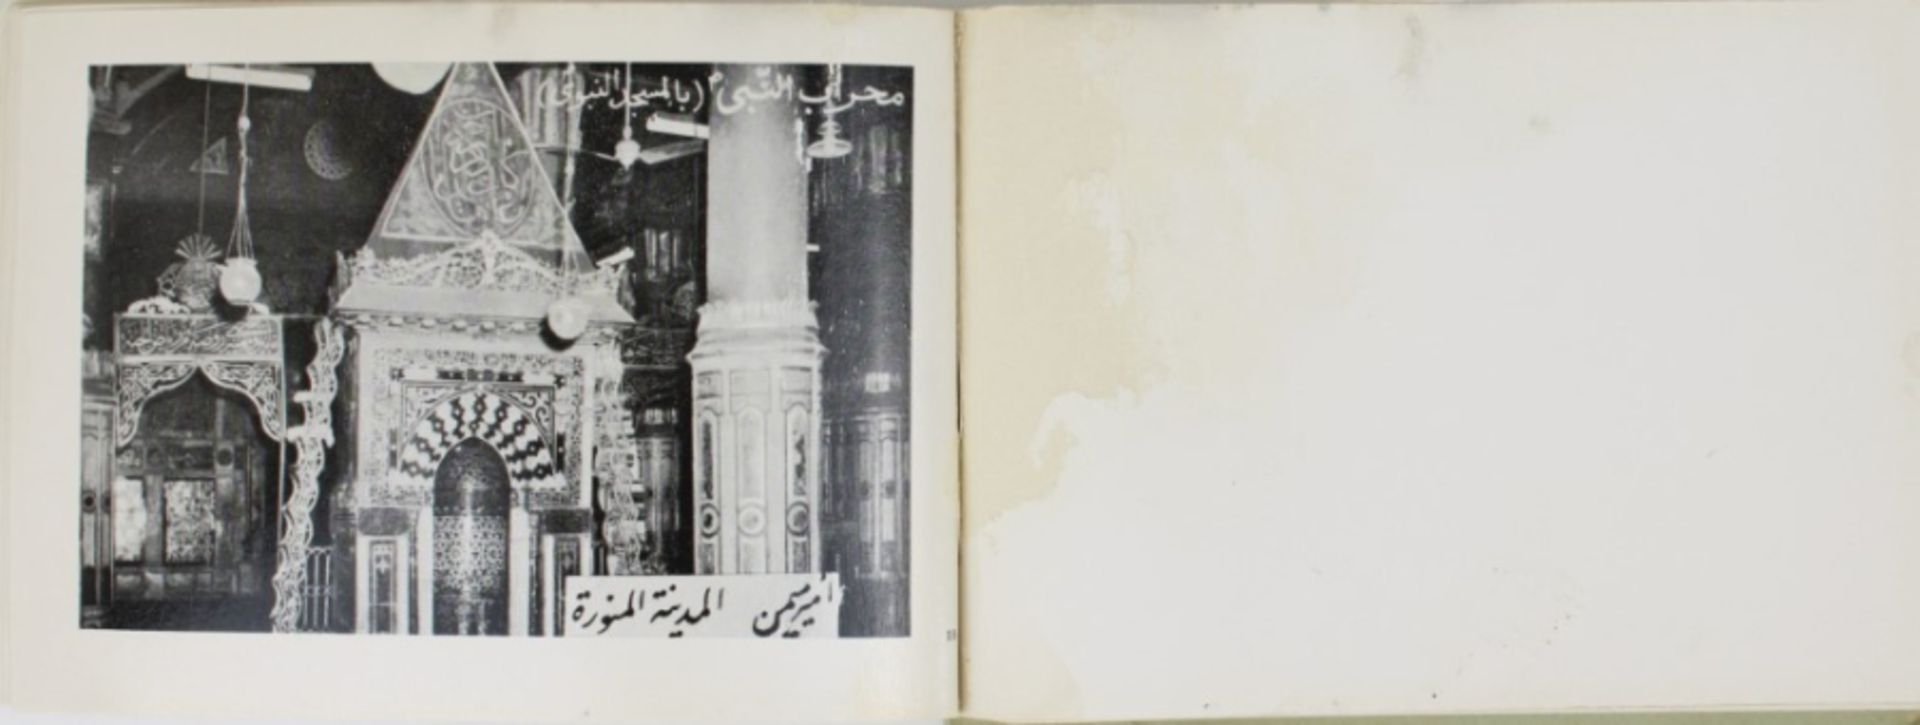 1930 Album with photographs of Mecca - Image 16 of 24